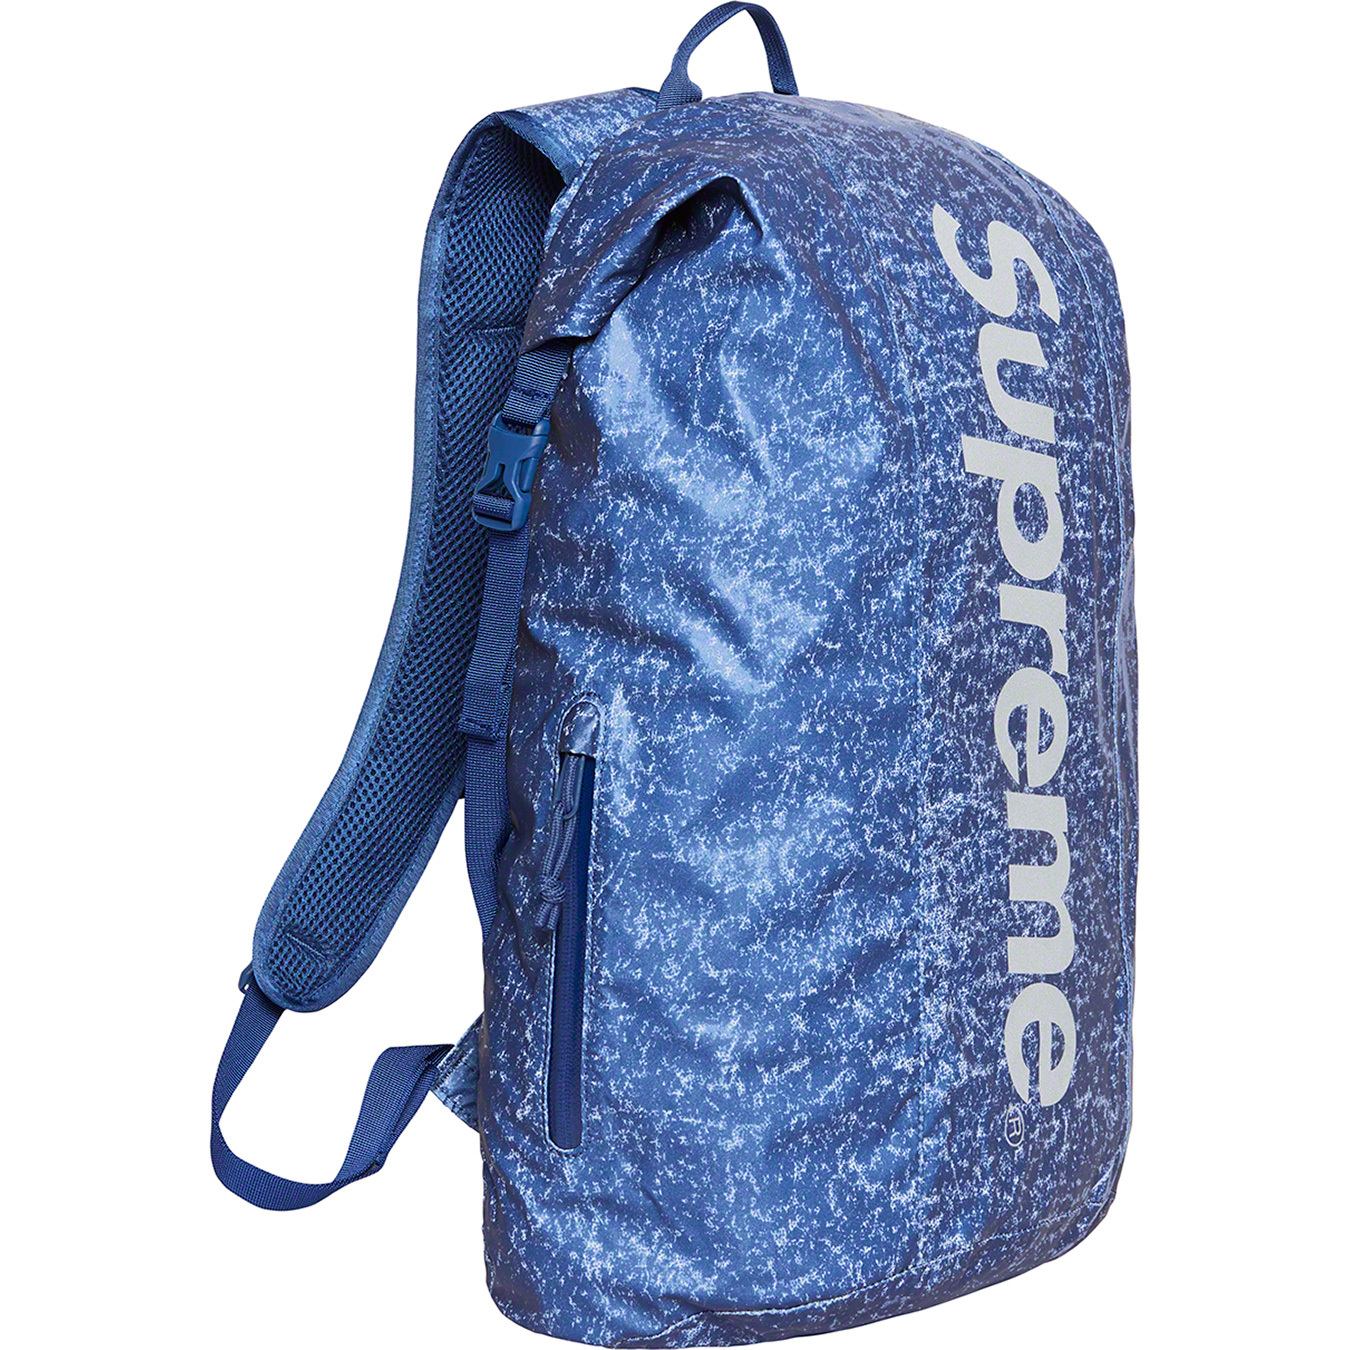 Waterproof Reflective Speckled Backpack - fall winter 2020 - Supreme